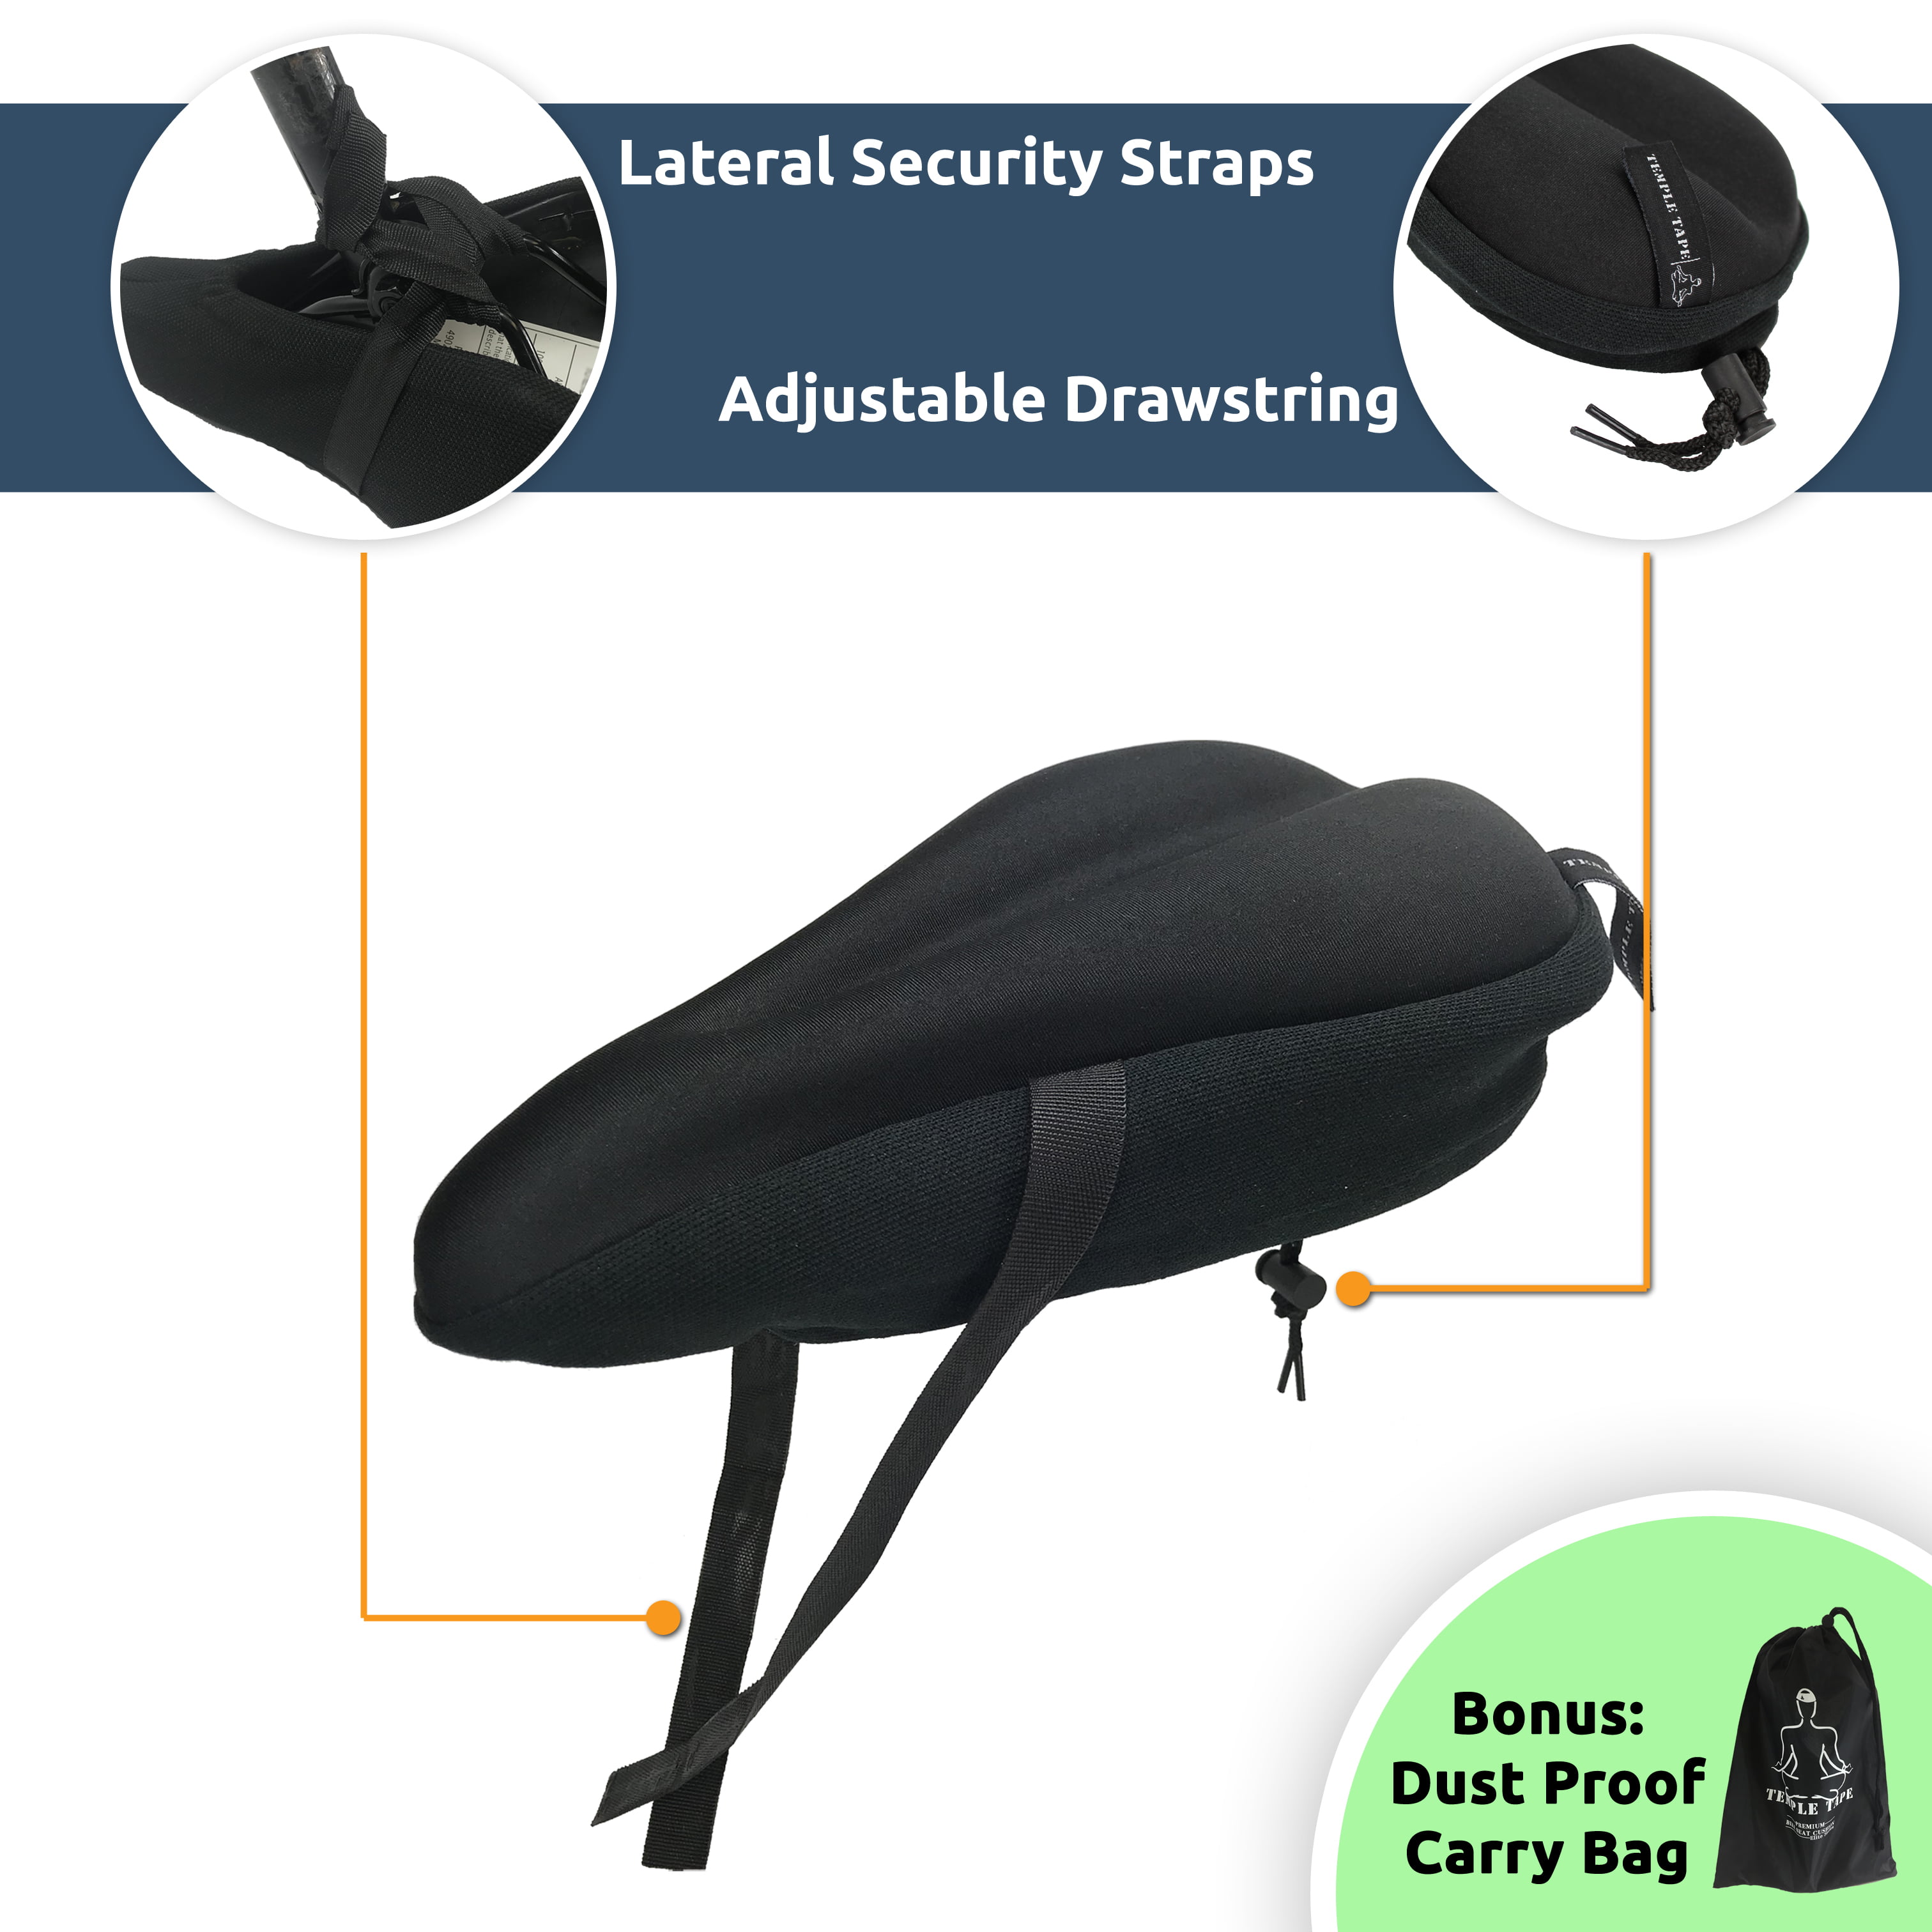 LuxoBike Gel Bike Seat Cover Padded Bicycle Seat Covers for Men Comfort  Extra Soft Padded Gel Bicycle Seat Pad Spin Bike Seat Cushion Pads Cycling,  Spinning Class, Exercise Bike Stationary Cycle Black